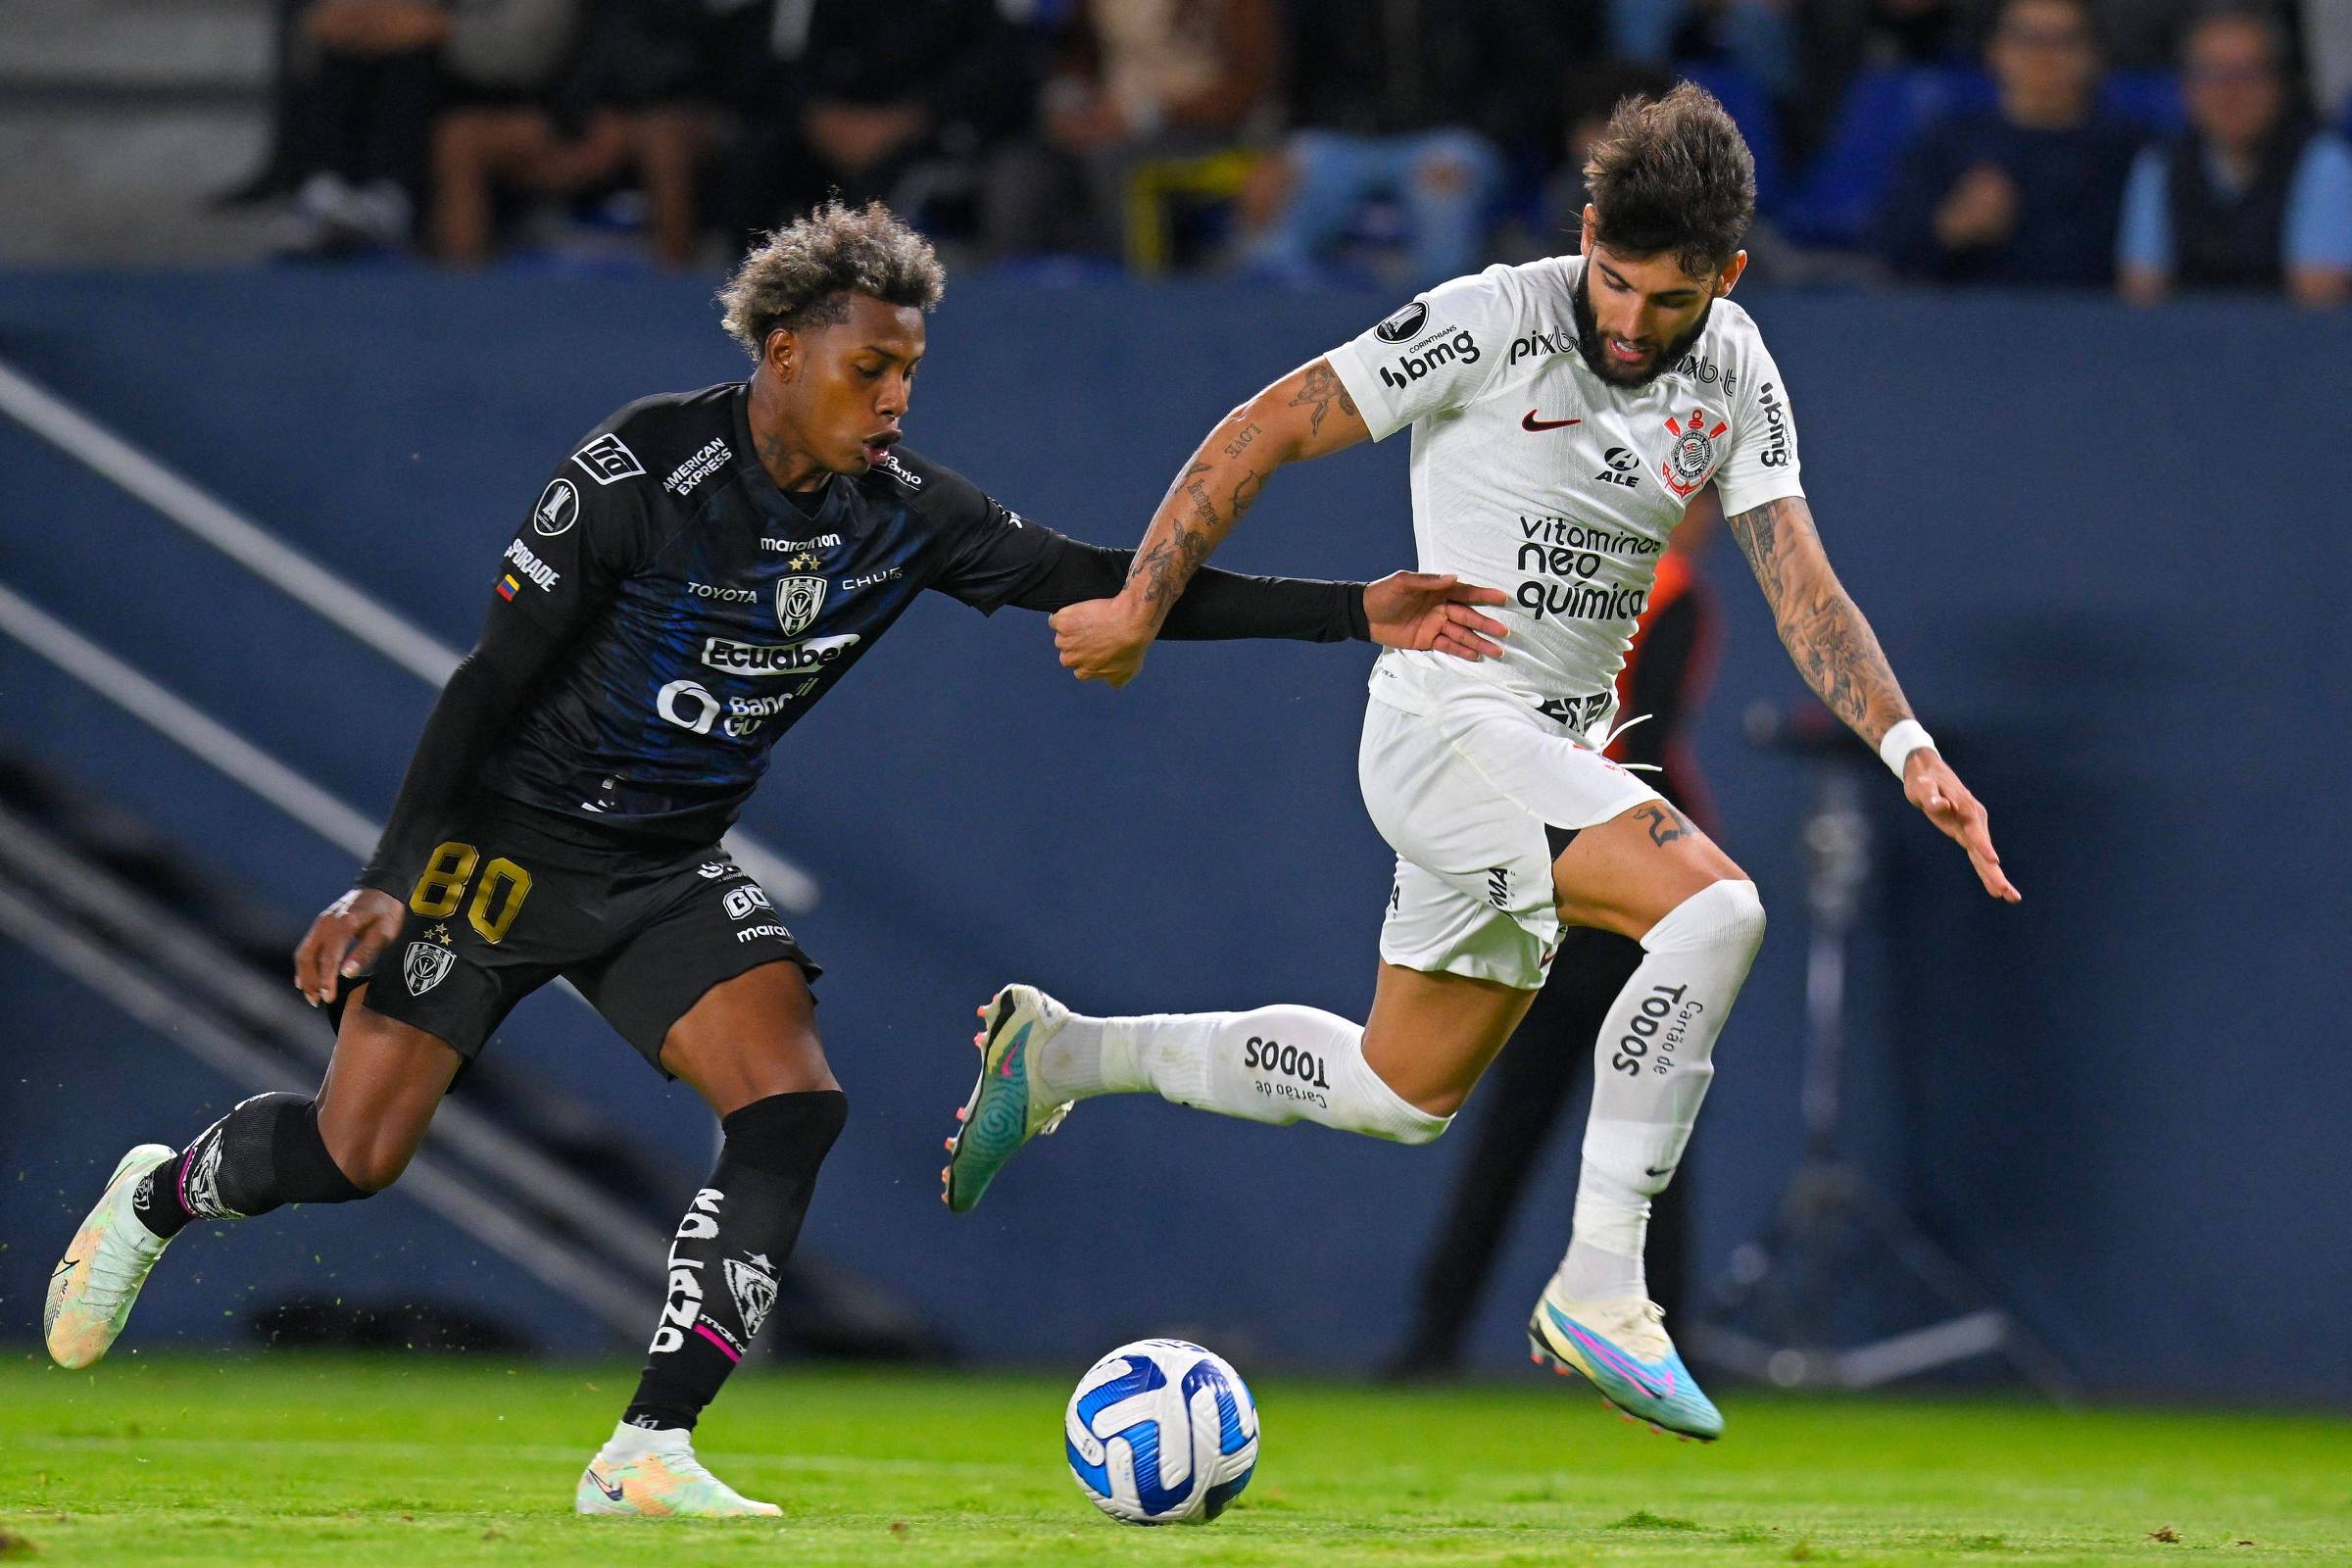 Corinthians loses to Del Valle and falls in the group stage of Libertadores